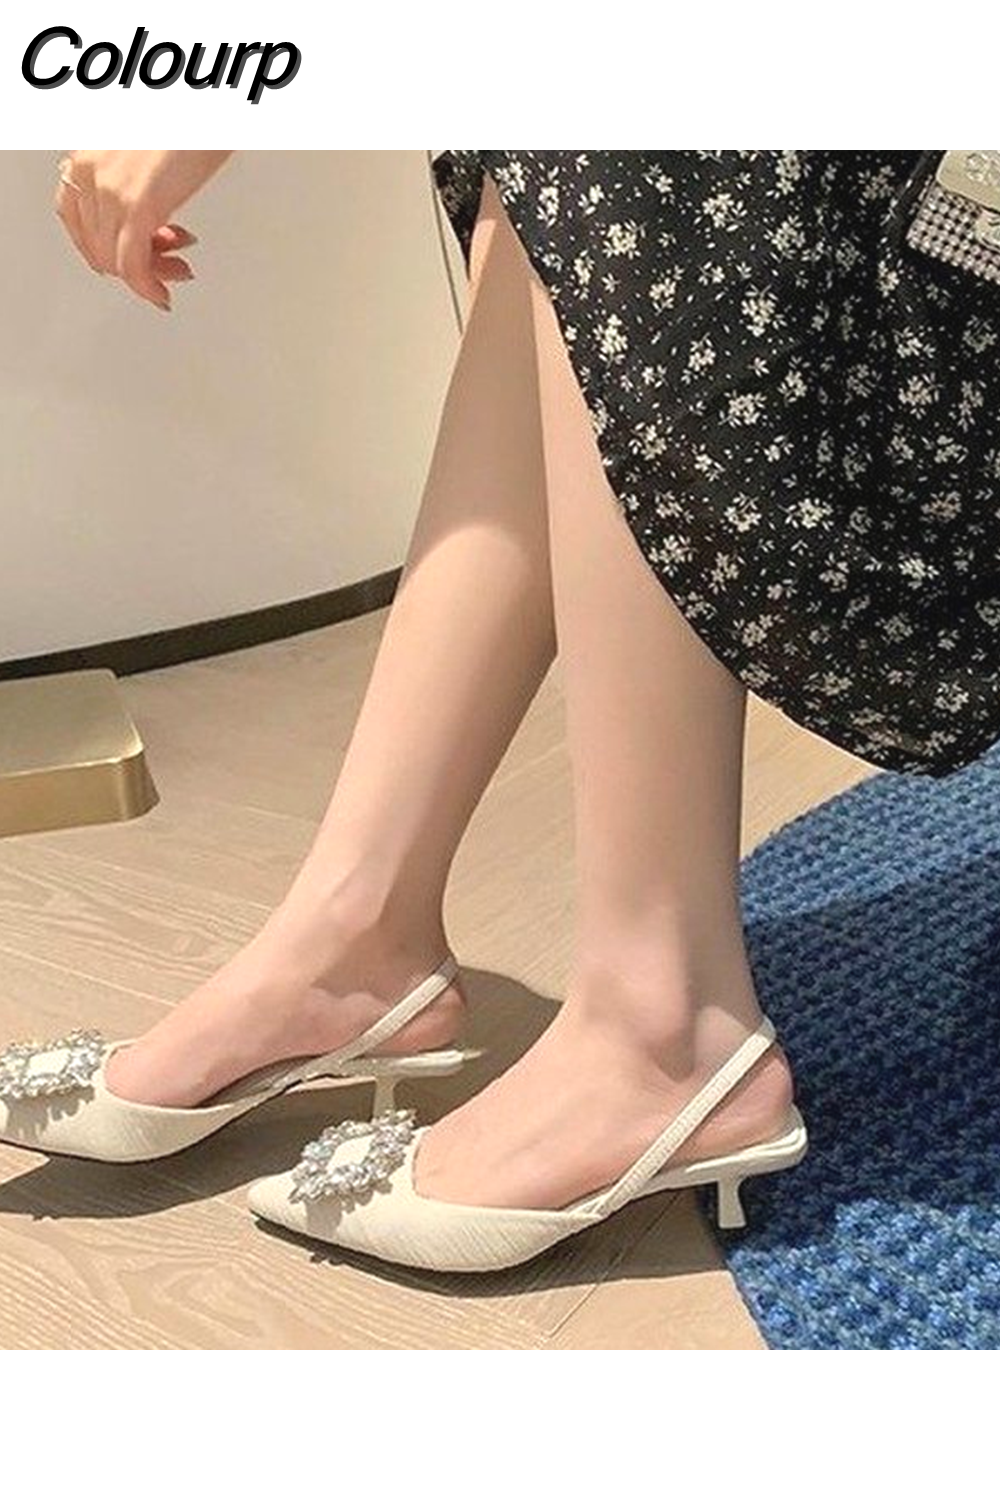 Colourp Summer Ladies Pumps Rhinestone Square Buckle Pointed Toe Shallow High Heel Sandals Sexy Women's Party Wedding Shoes 35-43